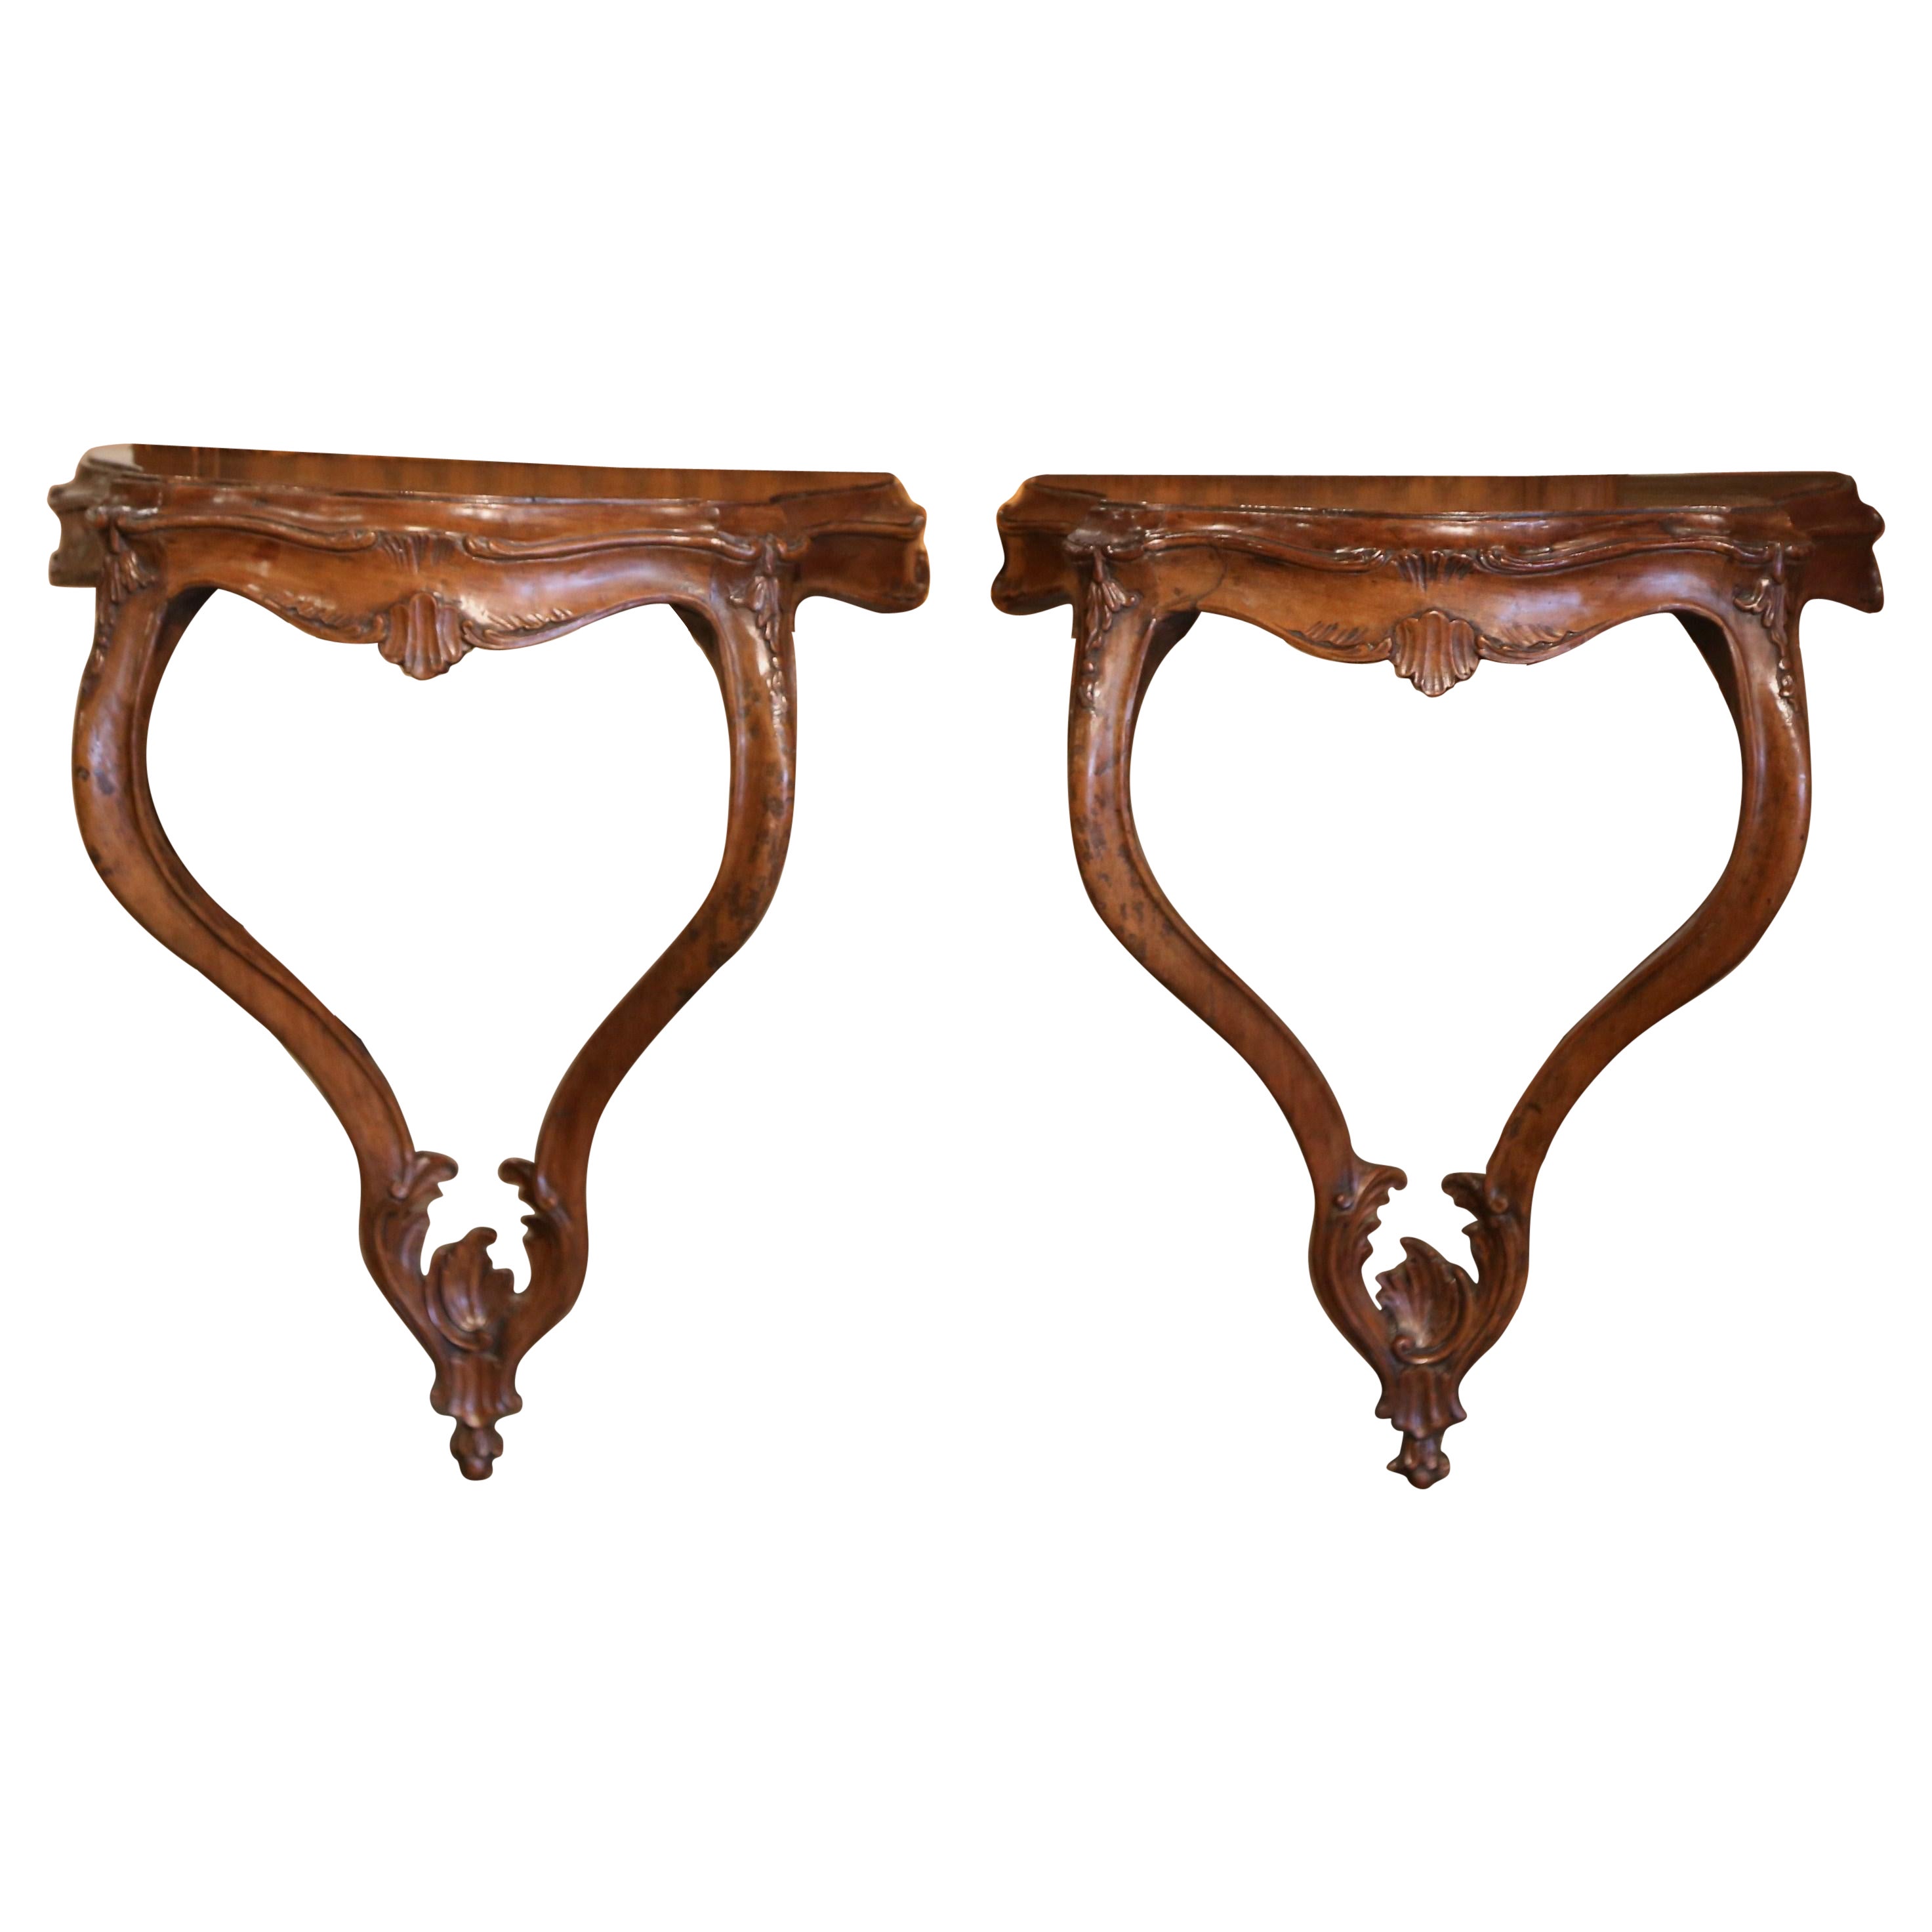 Pair of 19th Century Louis XV Carved Walnut Wall Brackets Consoles from Provence